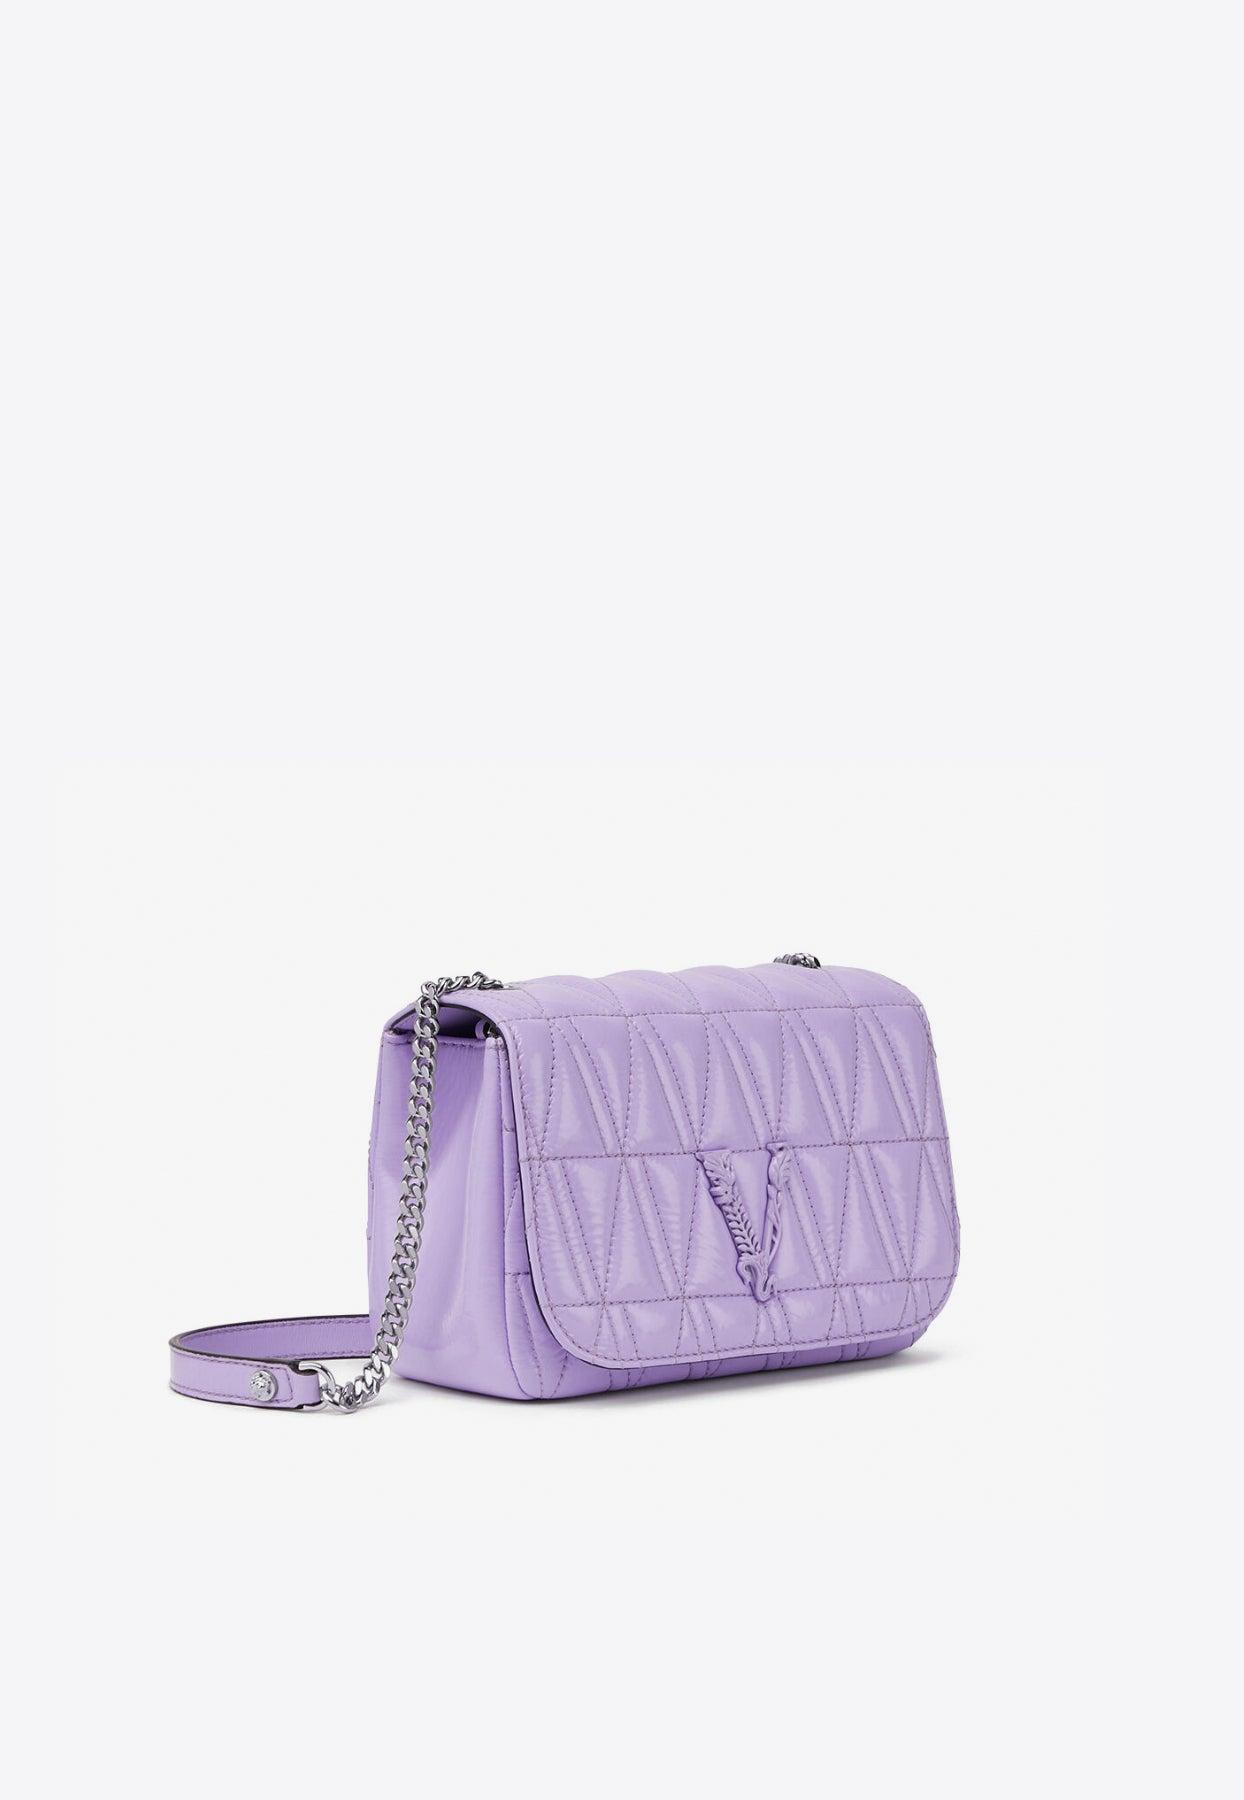 Versace Women's Purple Virtus Quilted Leather Evening Bag